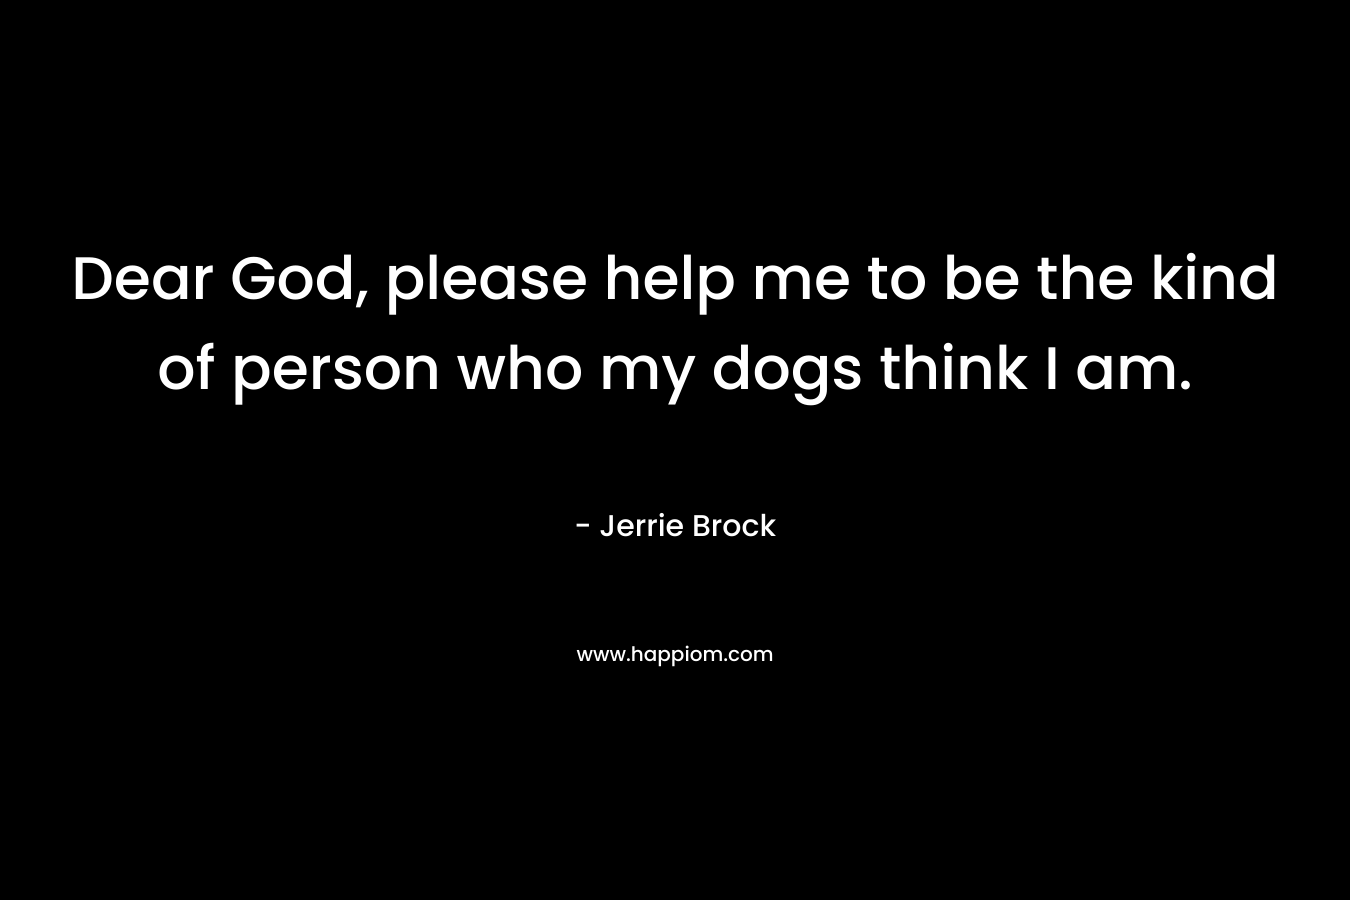 Dear God, please help me to be the kind of person who my dogs think I am.